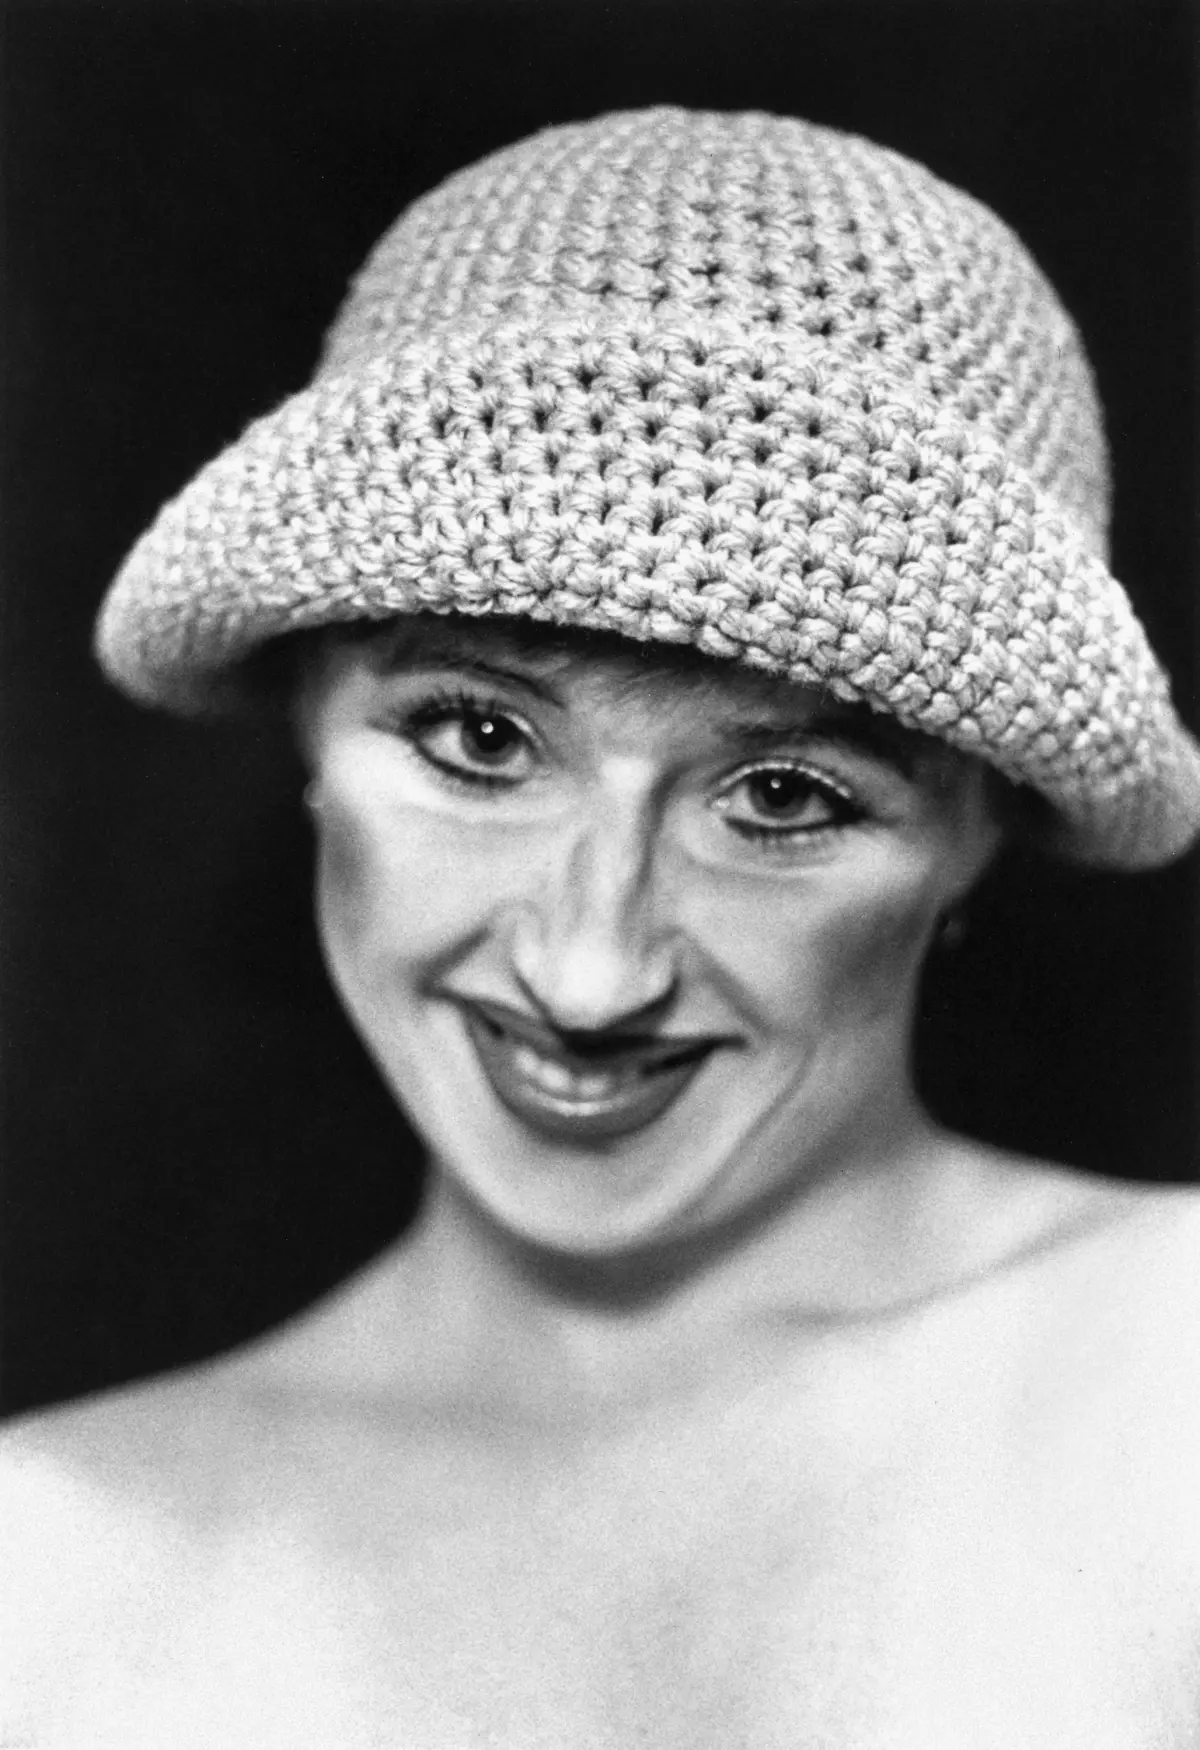 A portrait of a woman with a particular focus on her crocheted hat